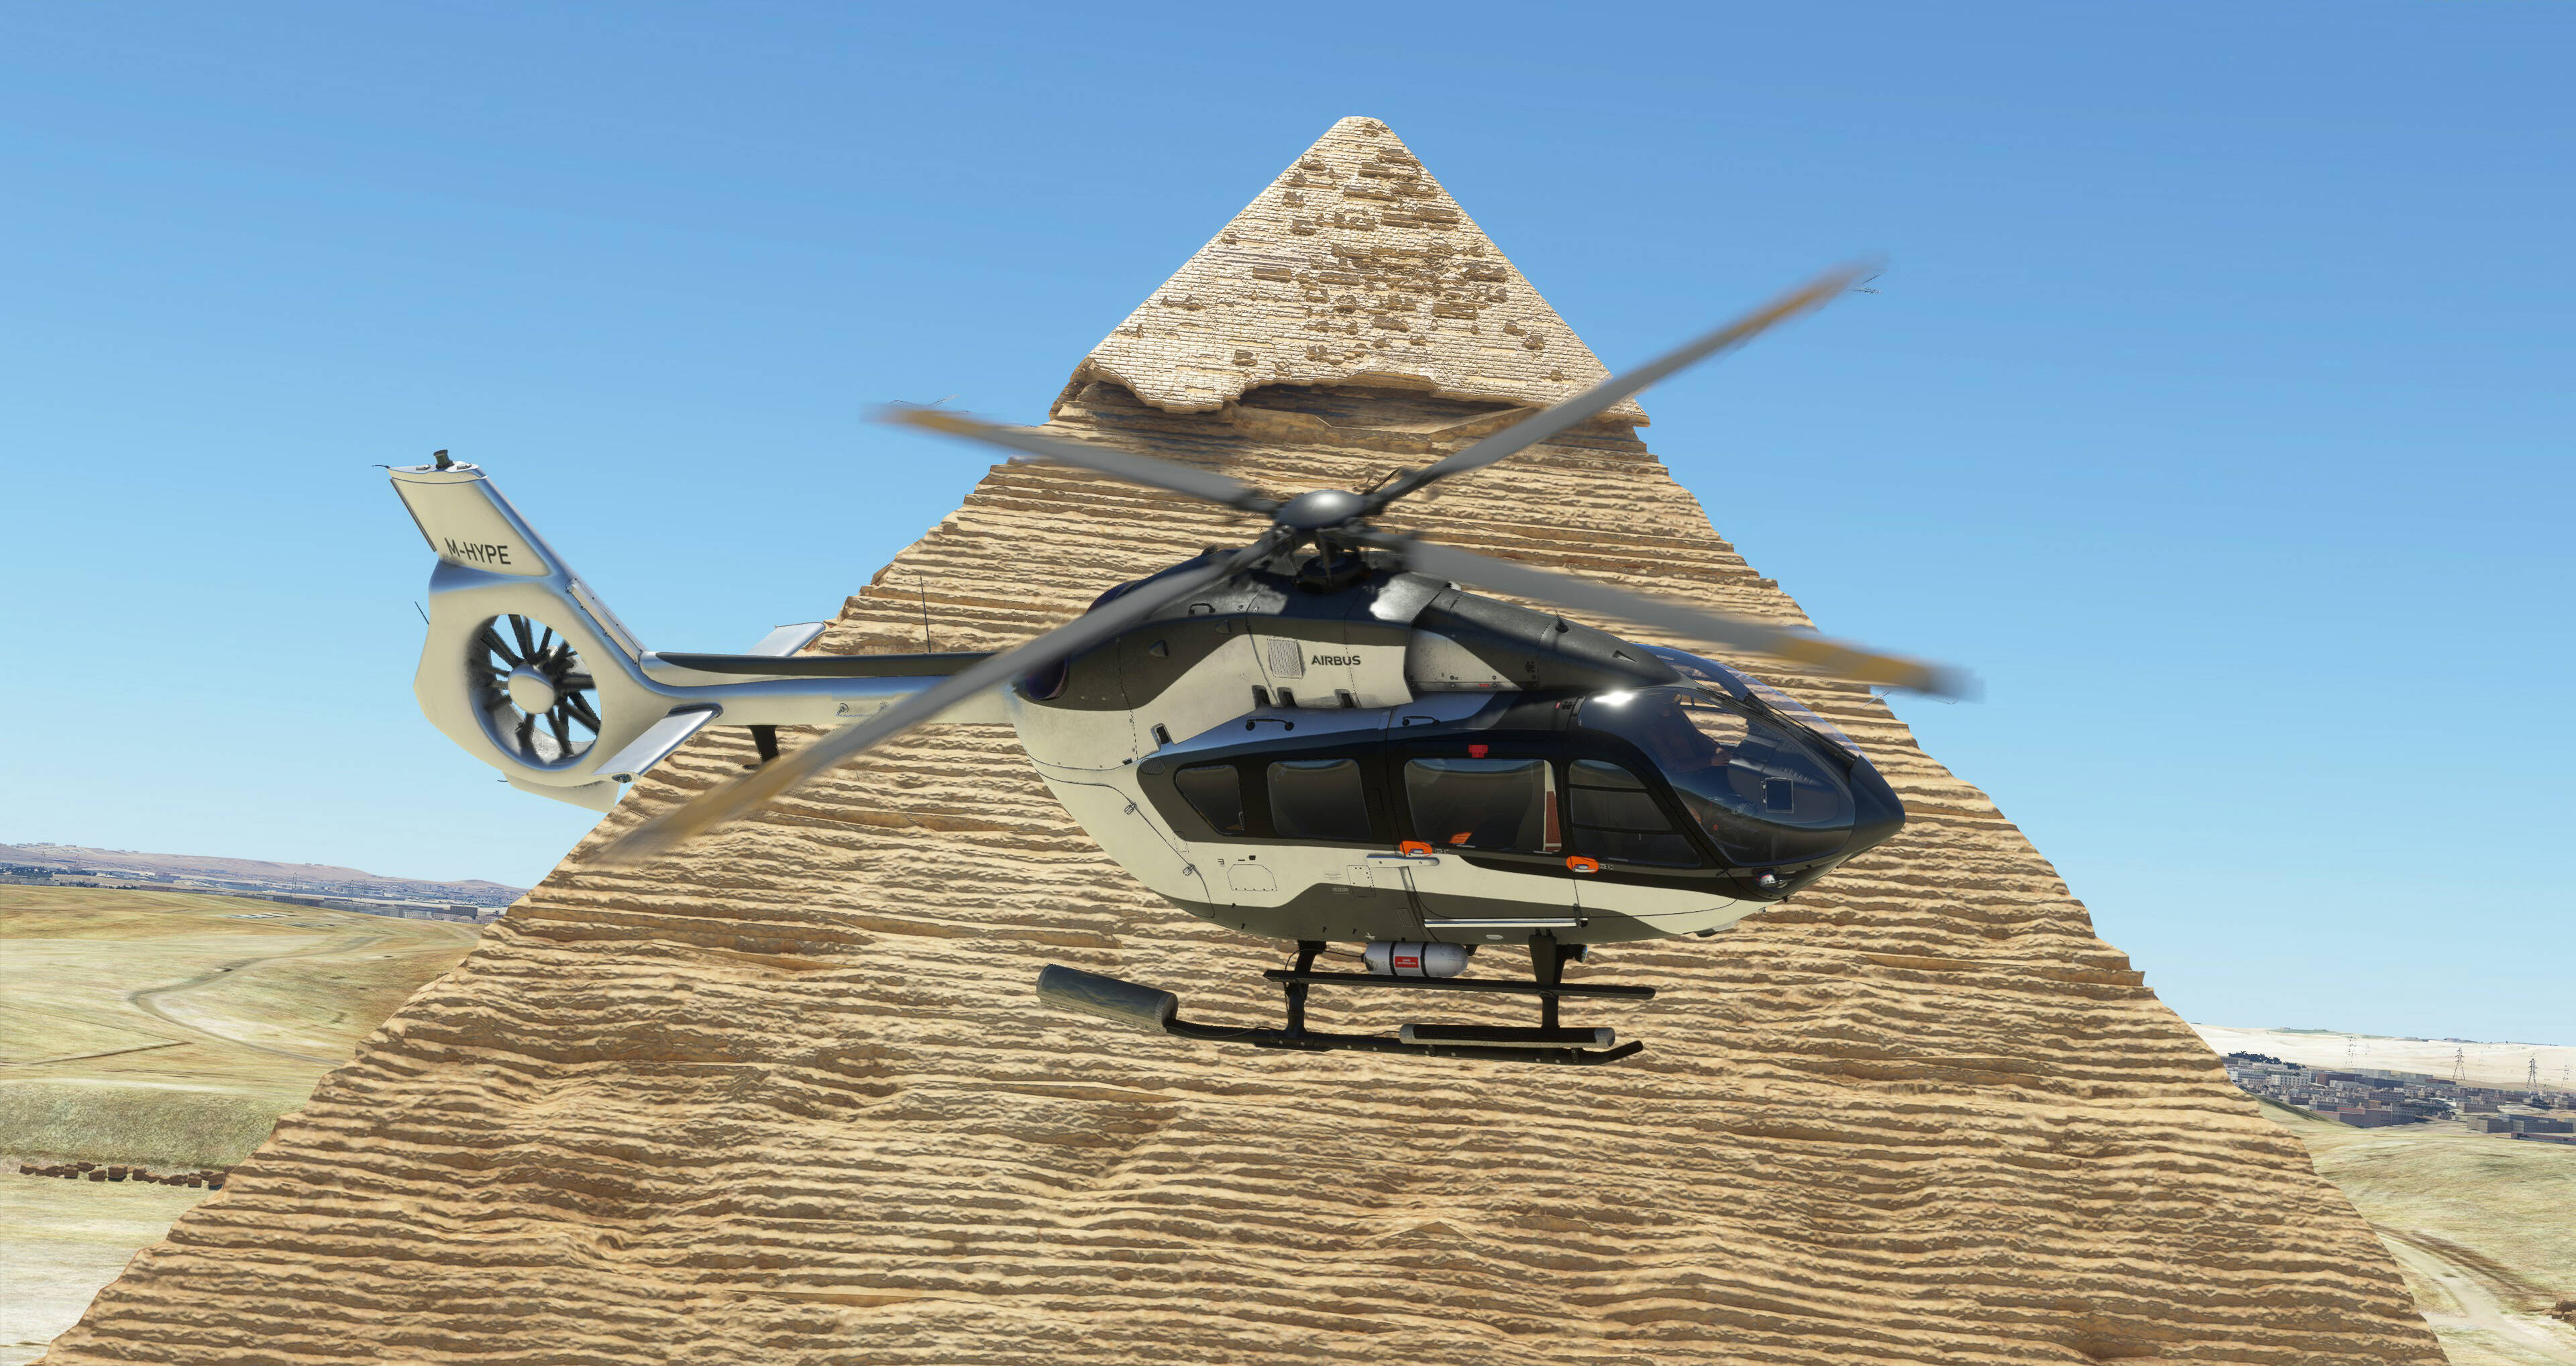 Microsoft Flight Simulator is getting a futuristic new helicopter